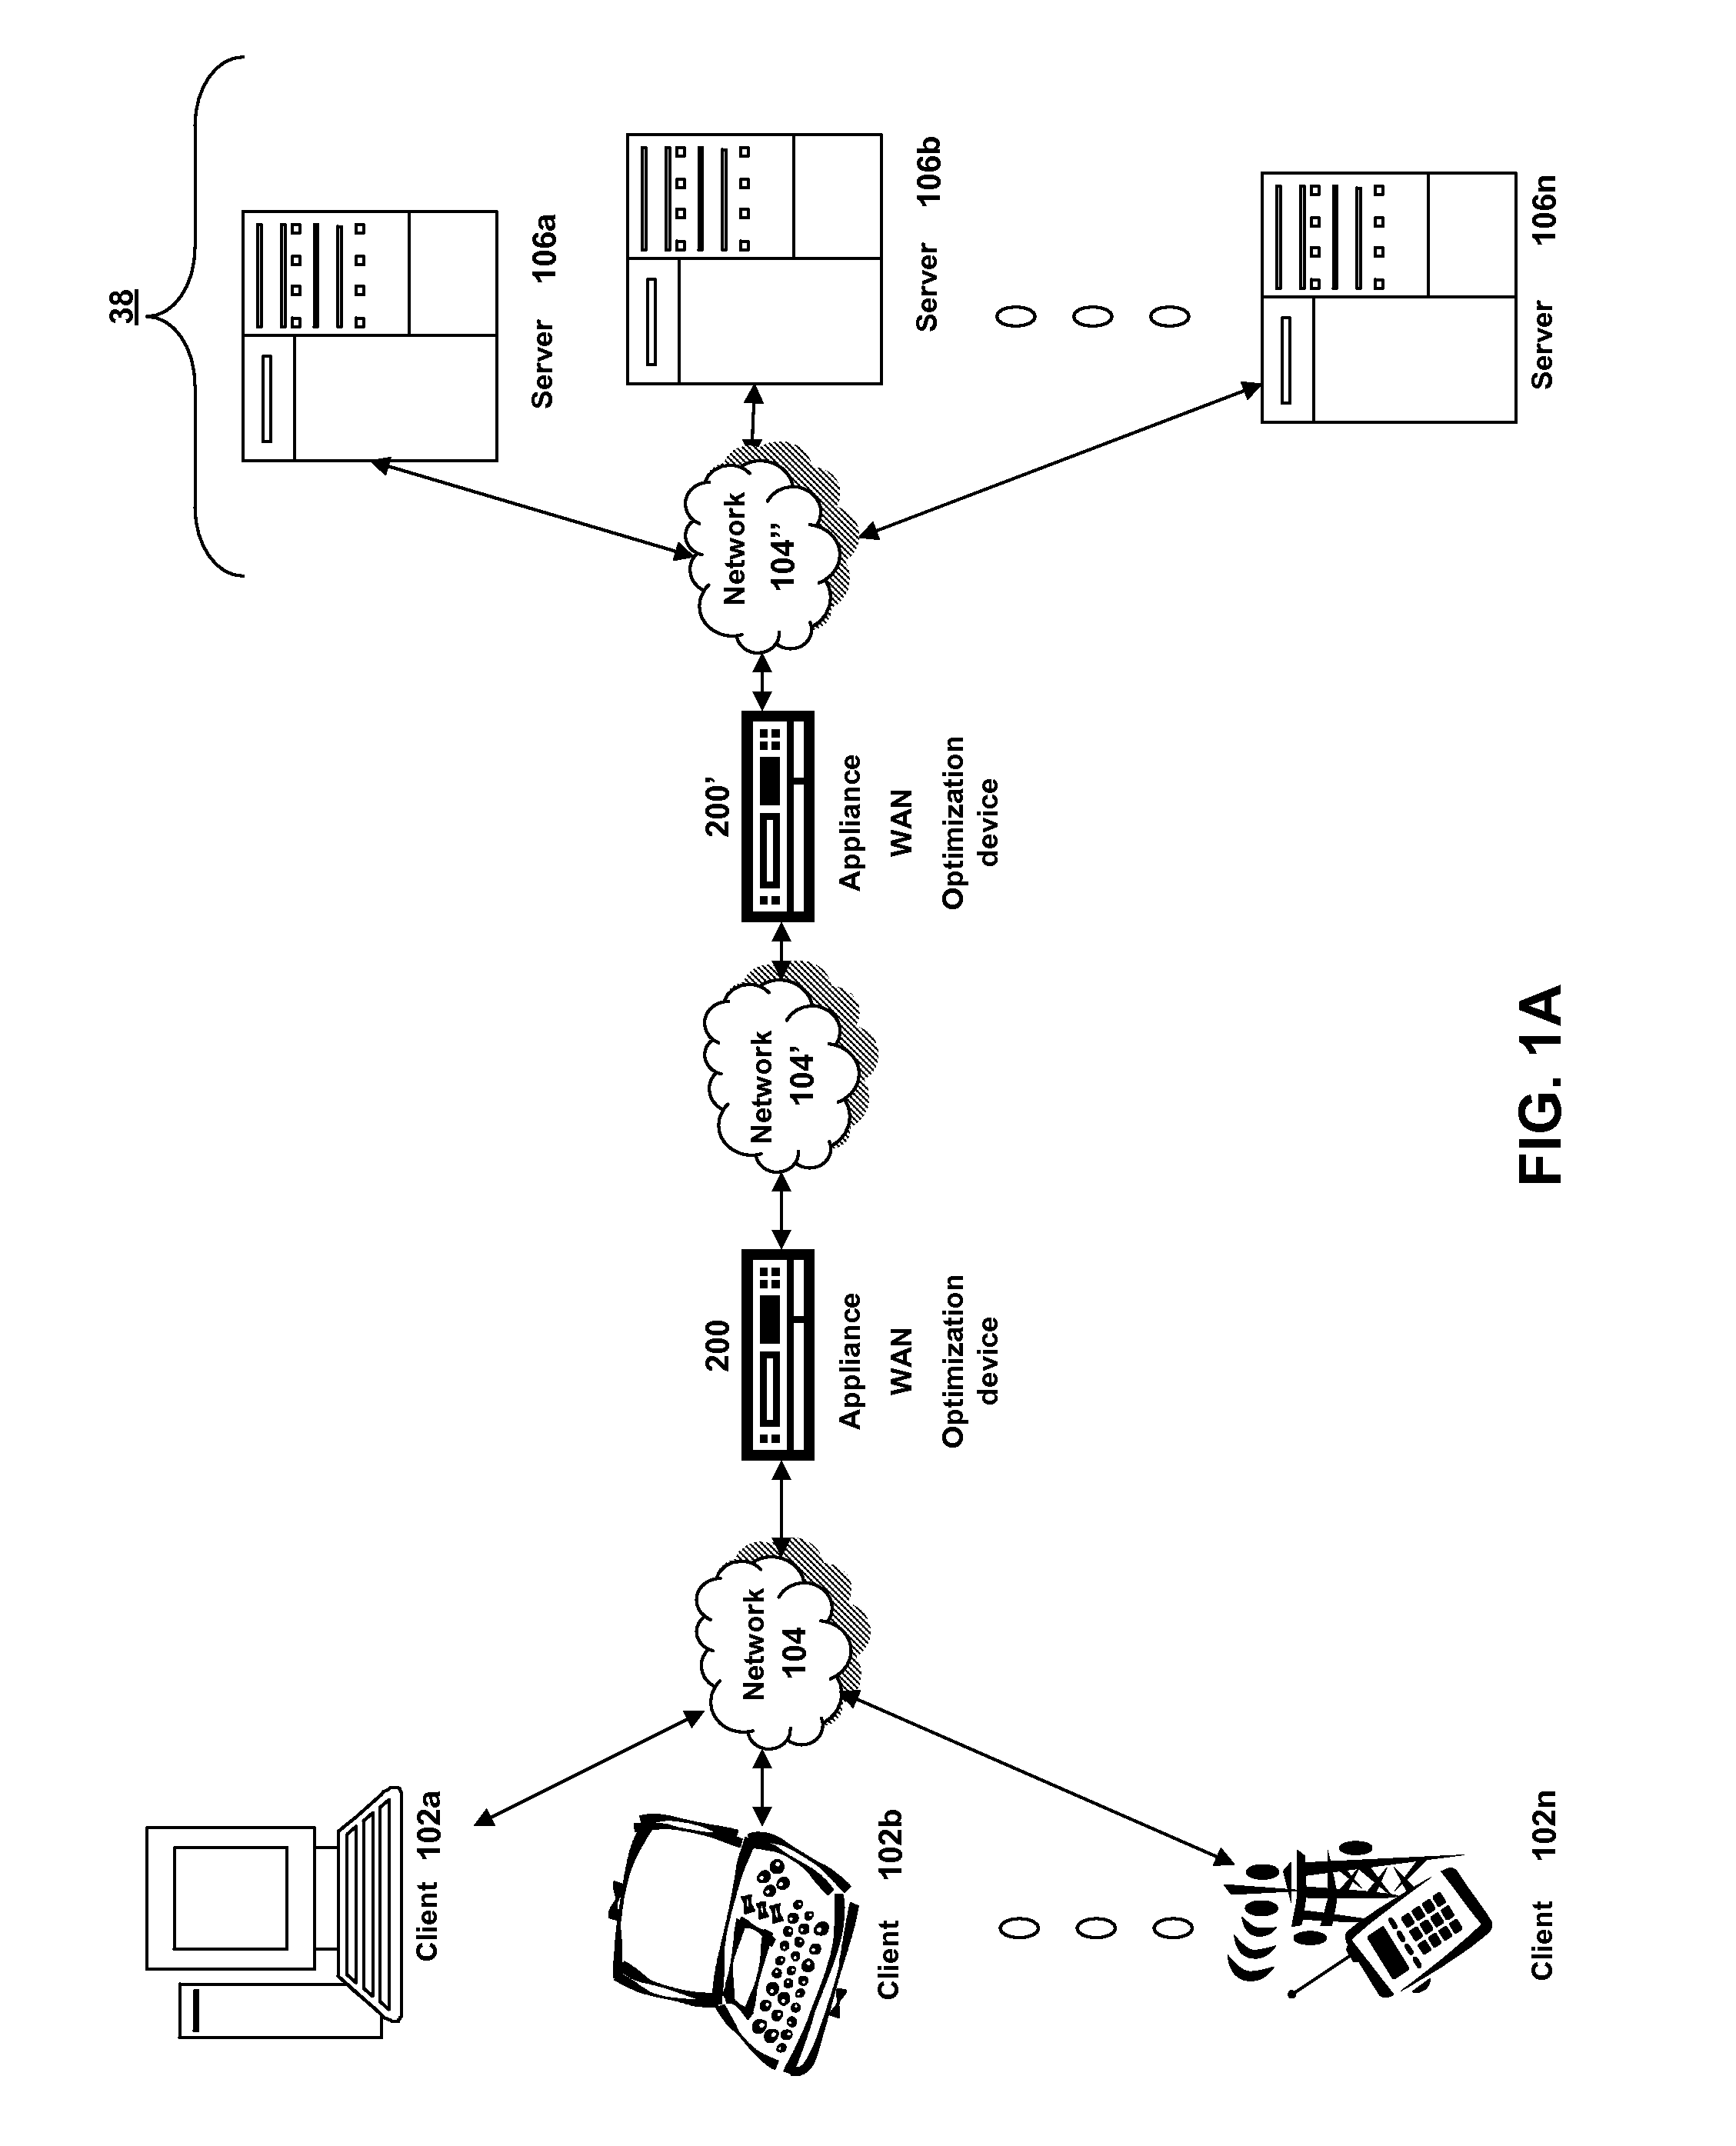 Systems and methods for prefetching non-cacheable content for compression history